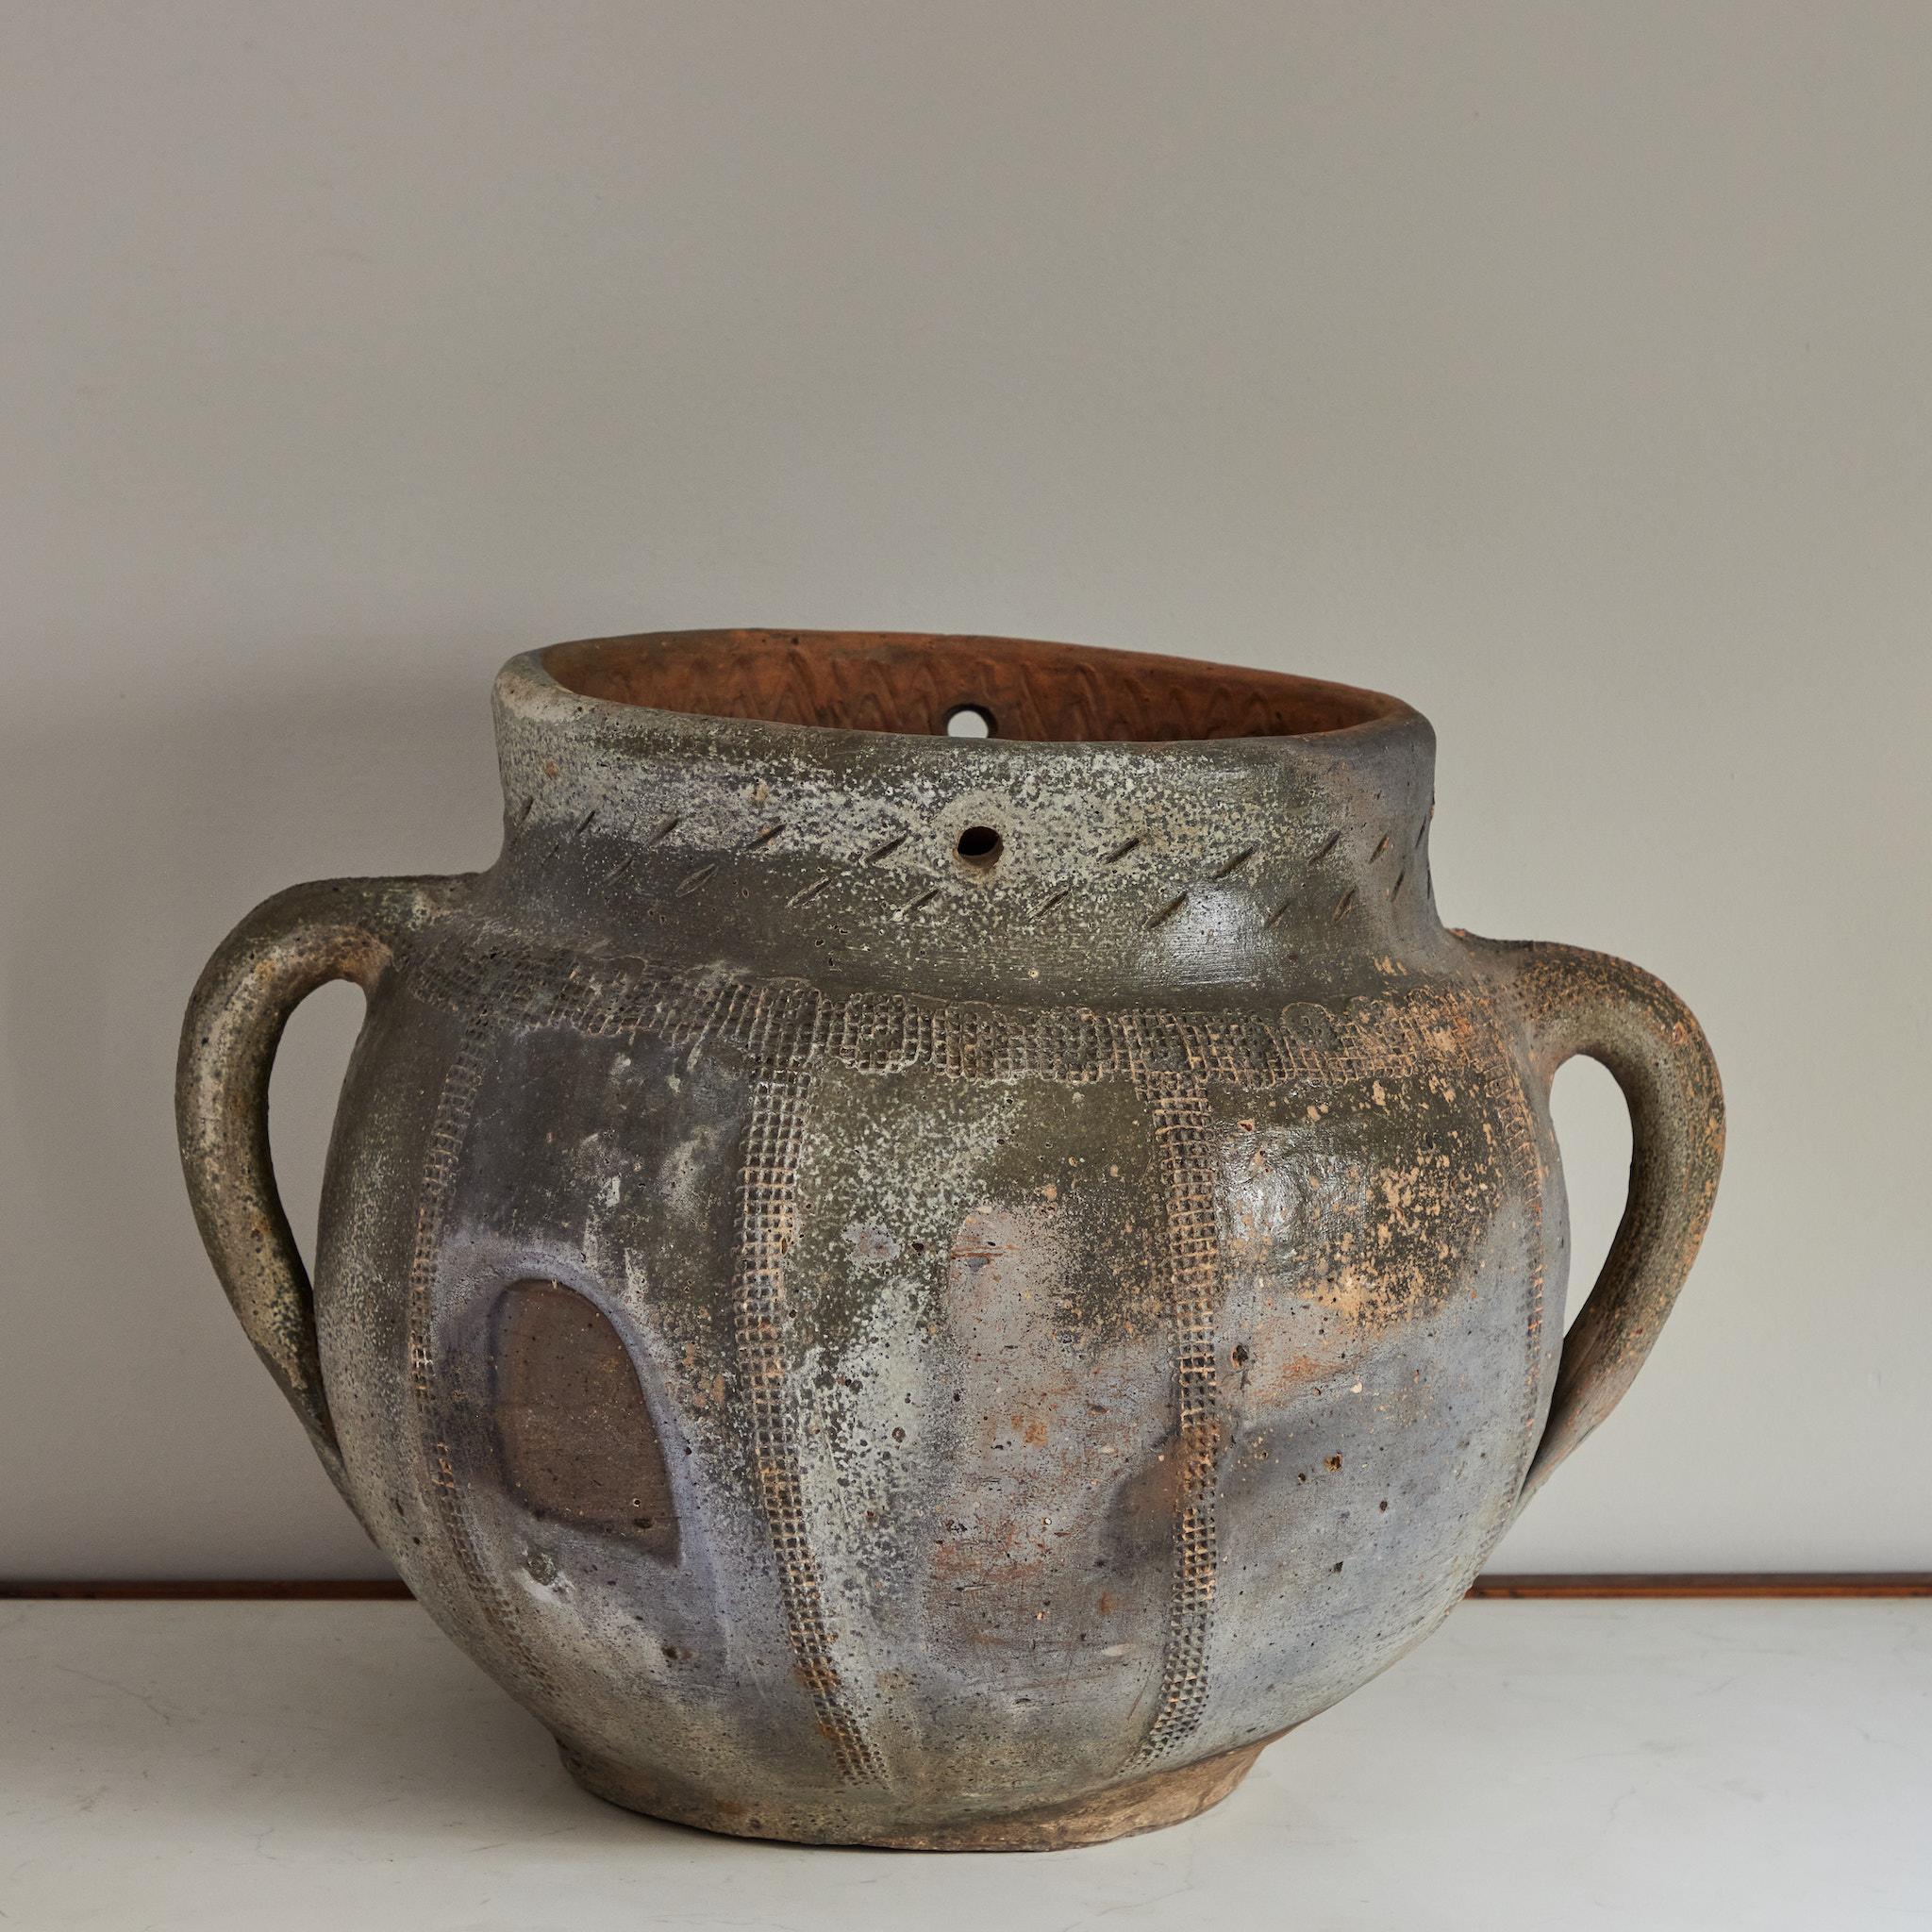 Blue grey glazed pot / vase with handles with beautiful color and patina.